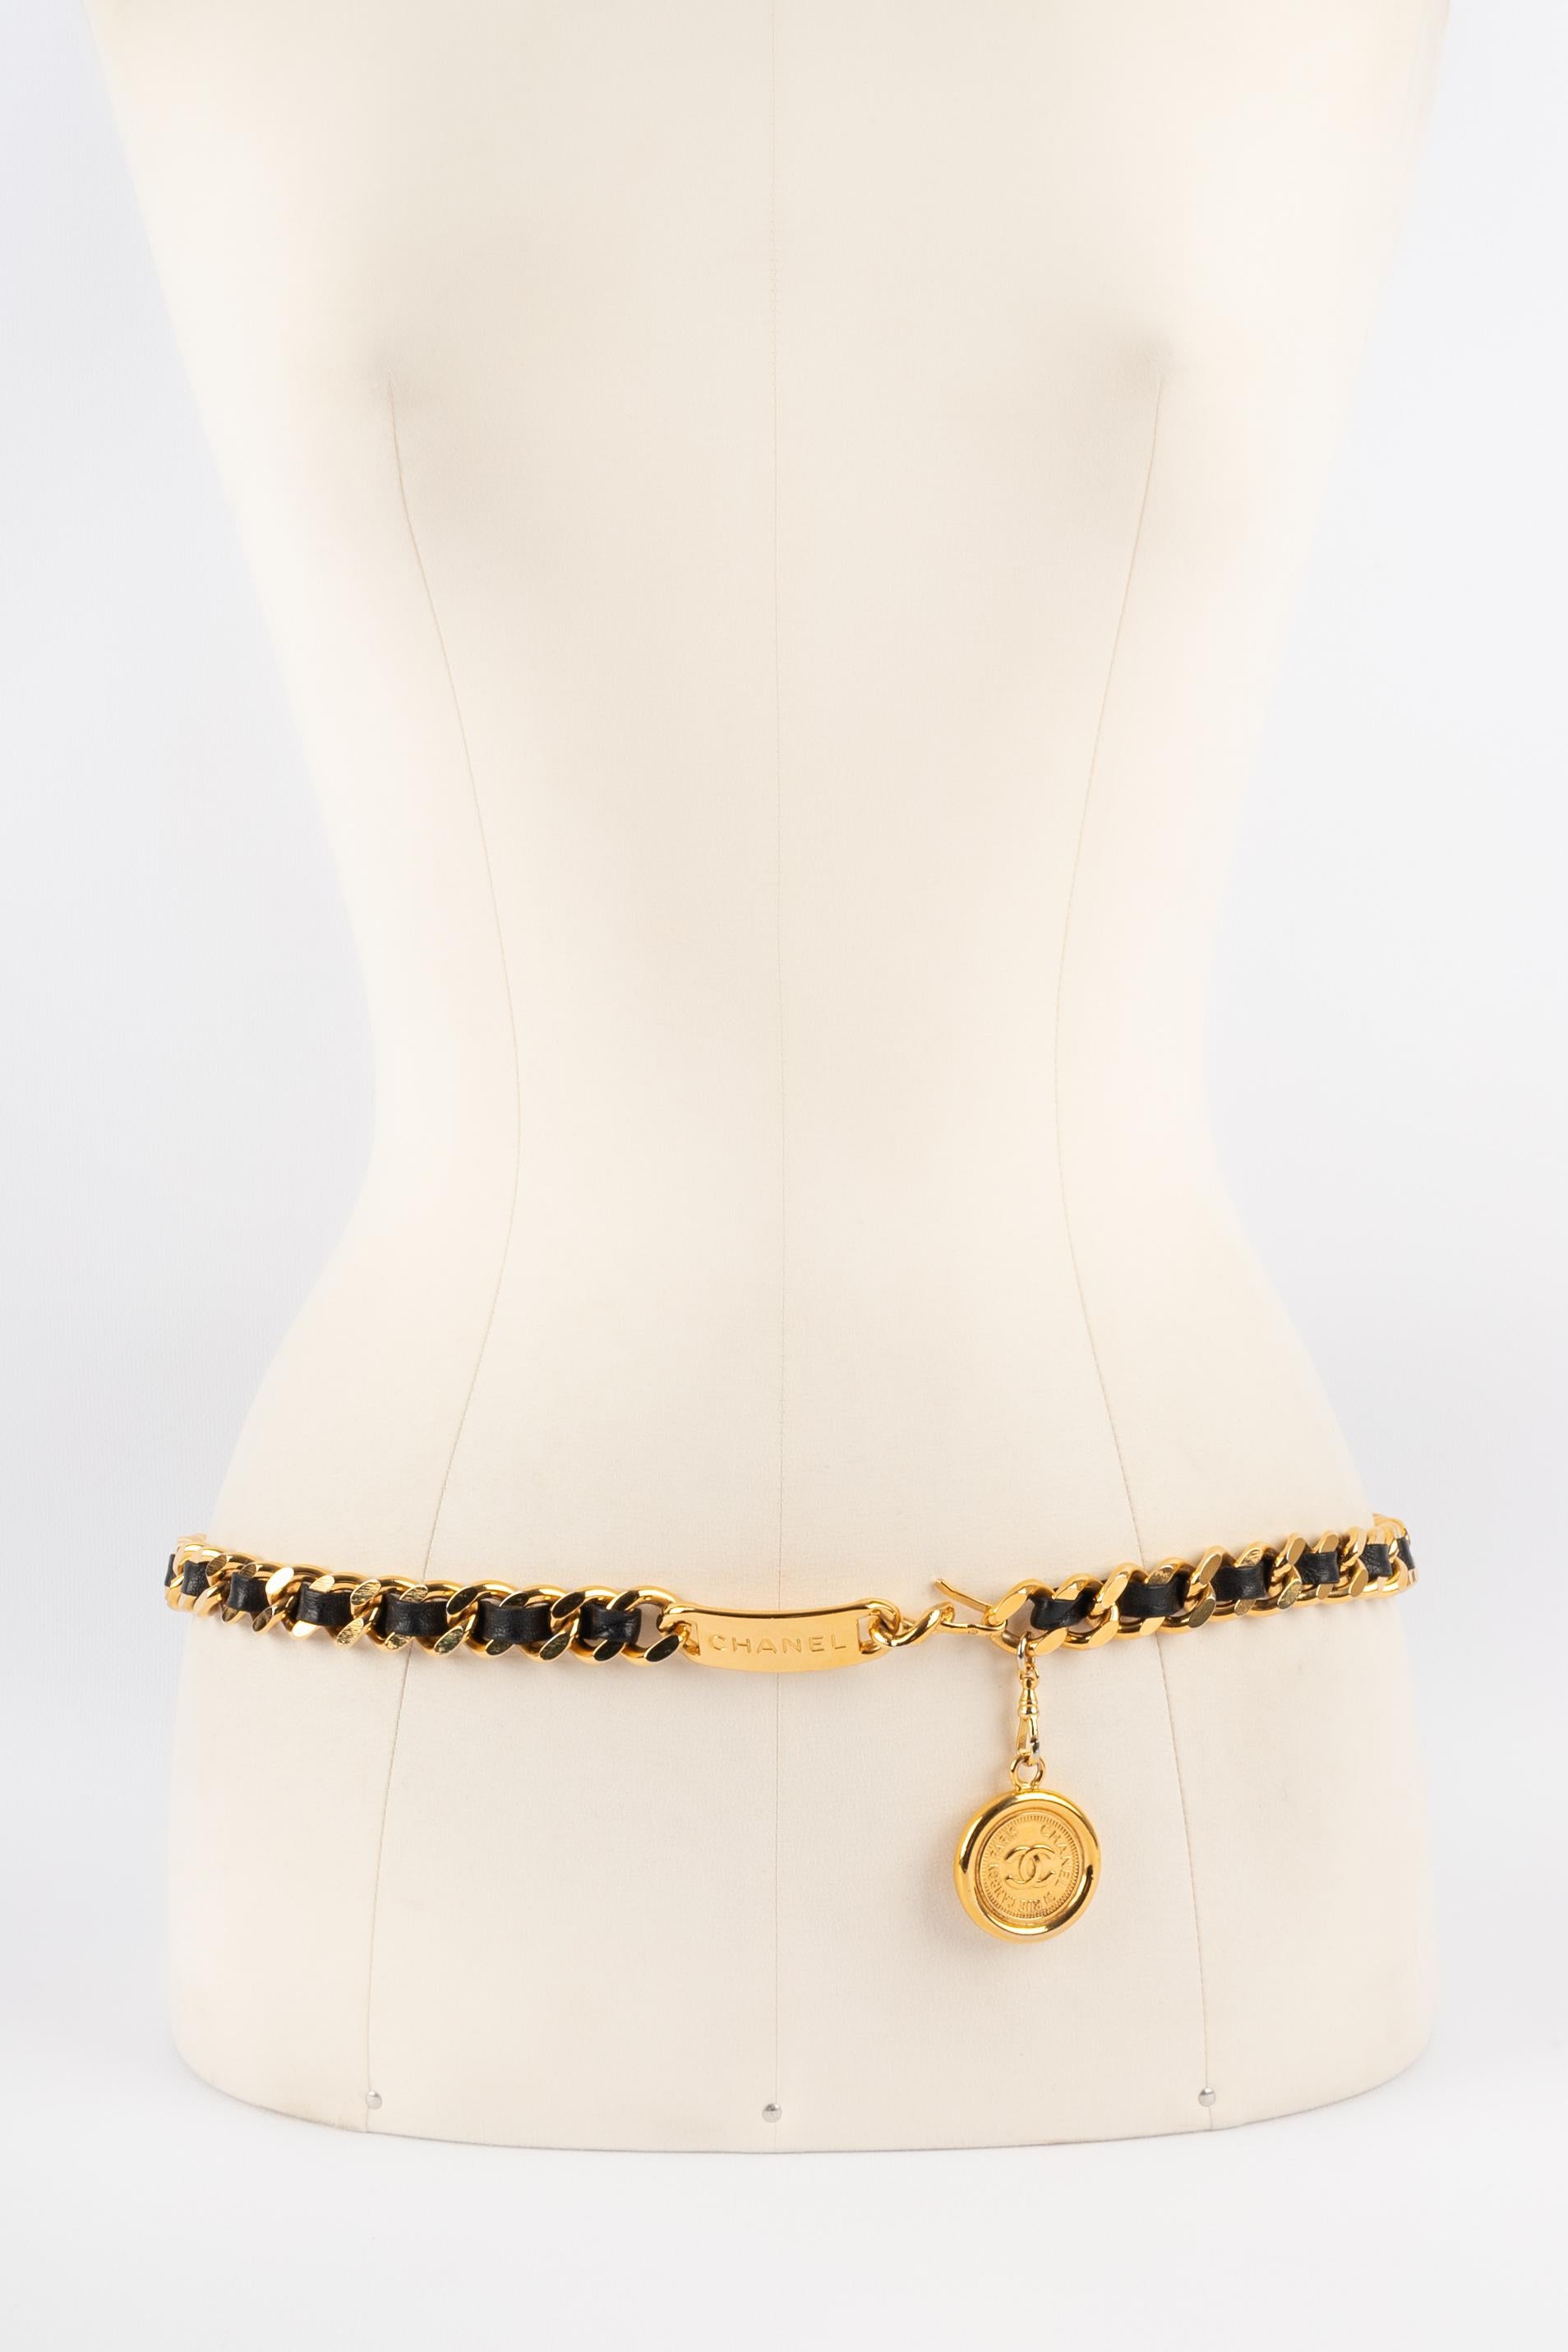 HANEL - (Made in France) Black leather and golden metal belt with a medallion at the end. Piece from the 1980s.

Condition:
Very good condition

Dimensions:
Length: 83 cm

CCB25